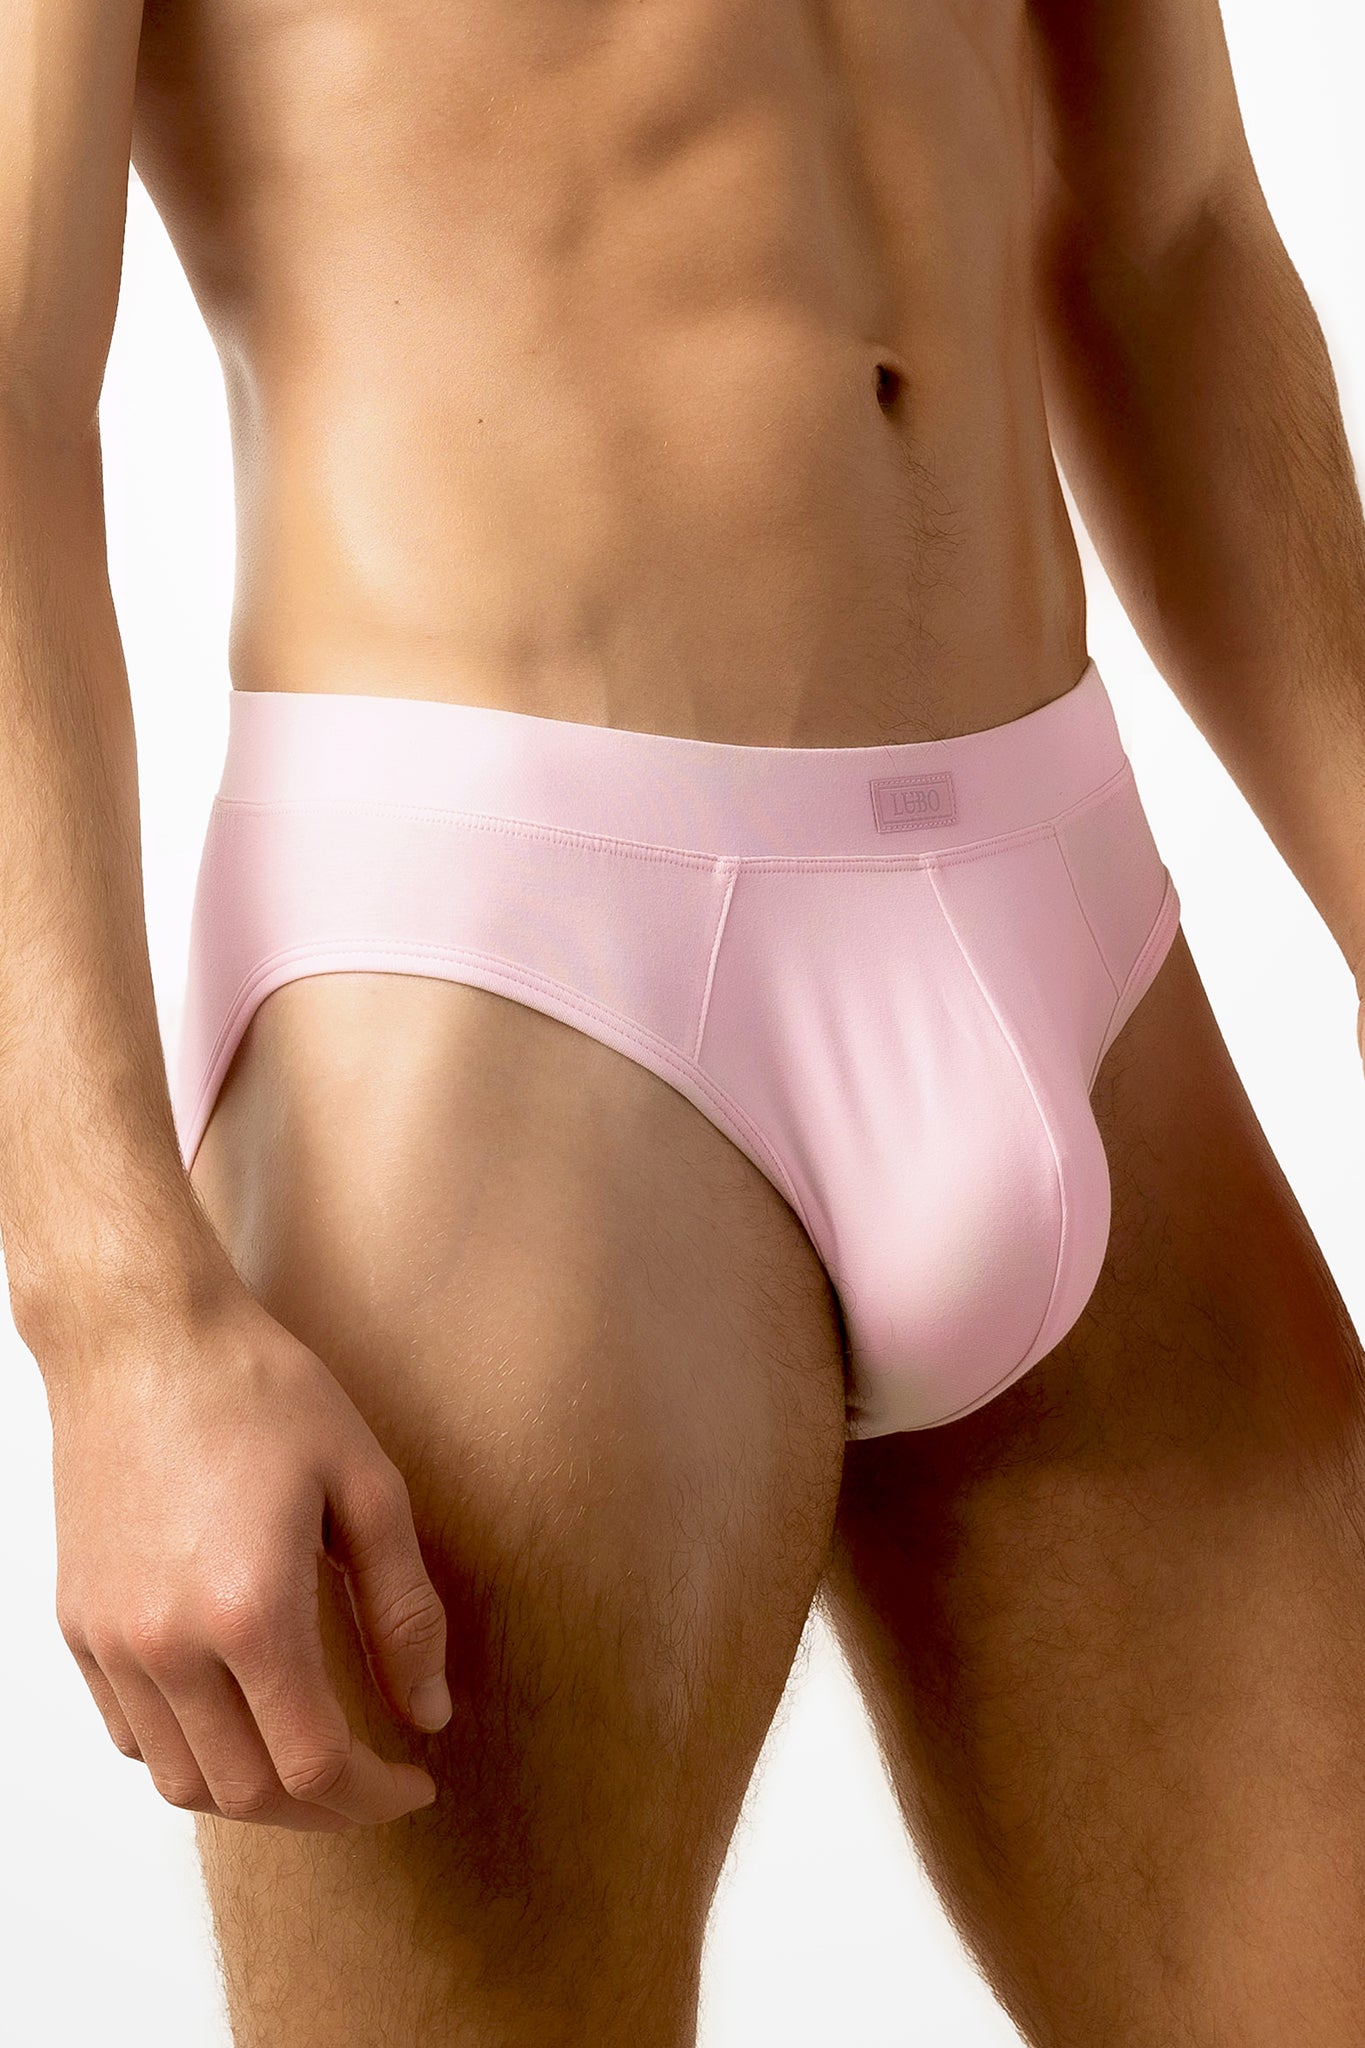 Classic underwear made from sustainable materials and timeless design.